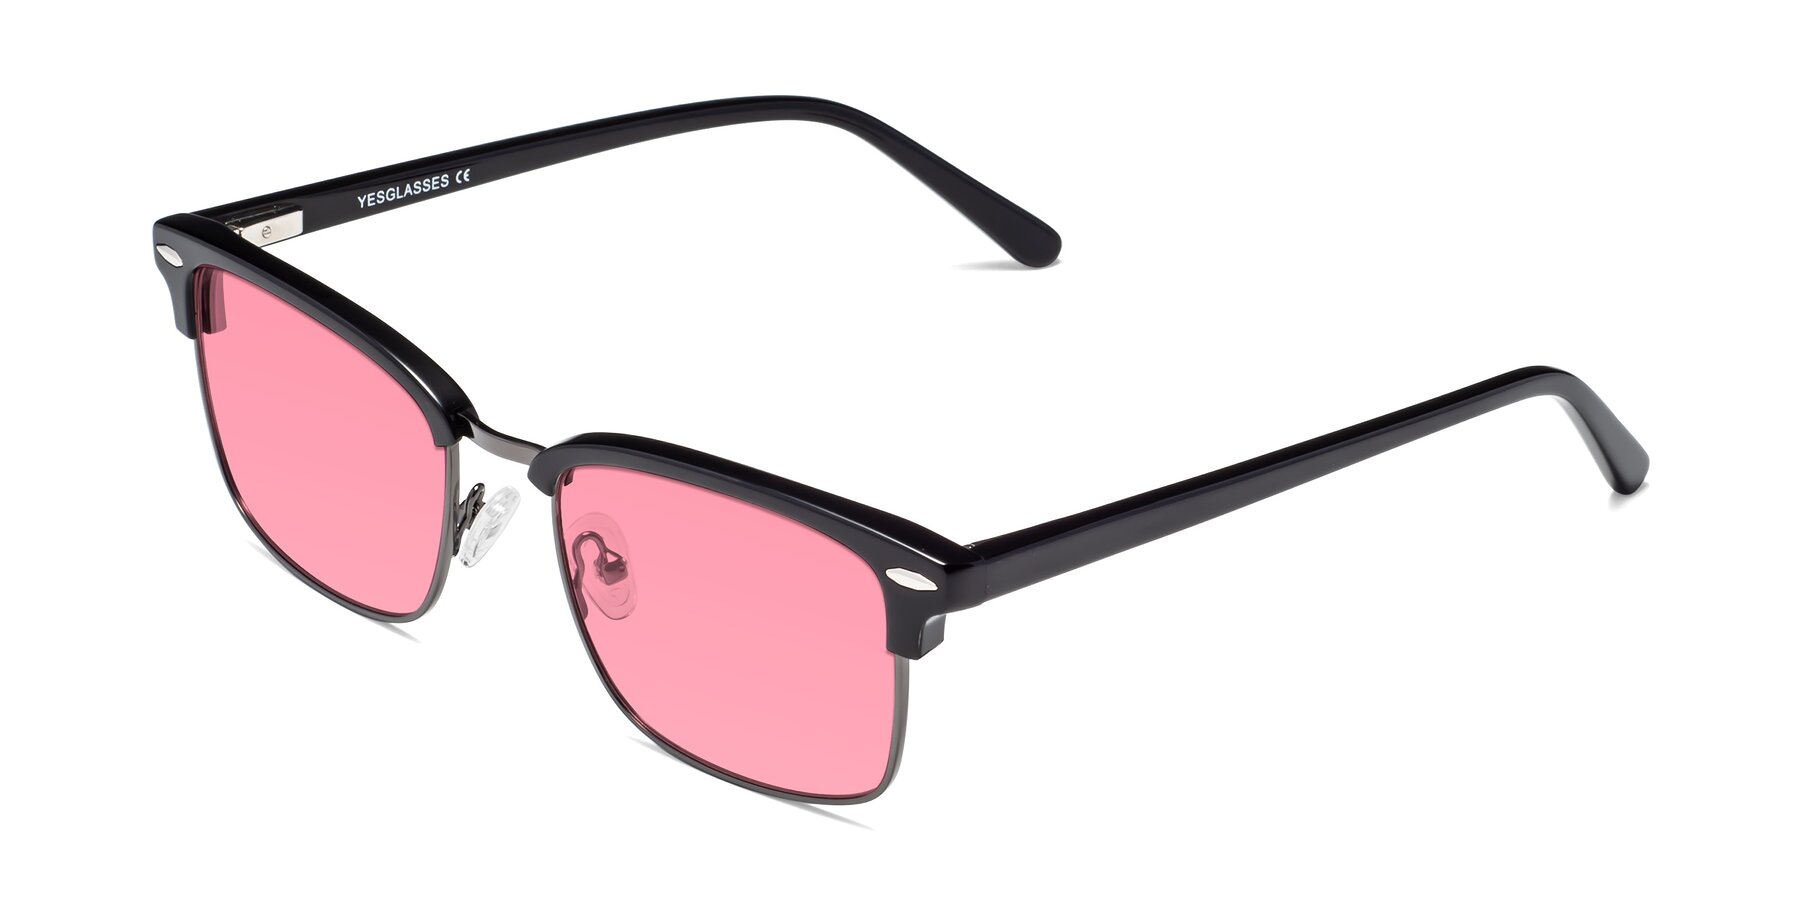 Angle of 17464 in Black-Gunmetal with Pink Tinted Lenses